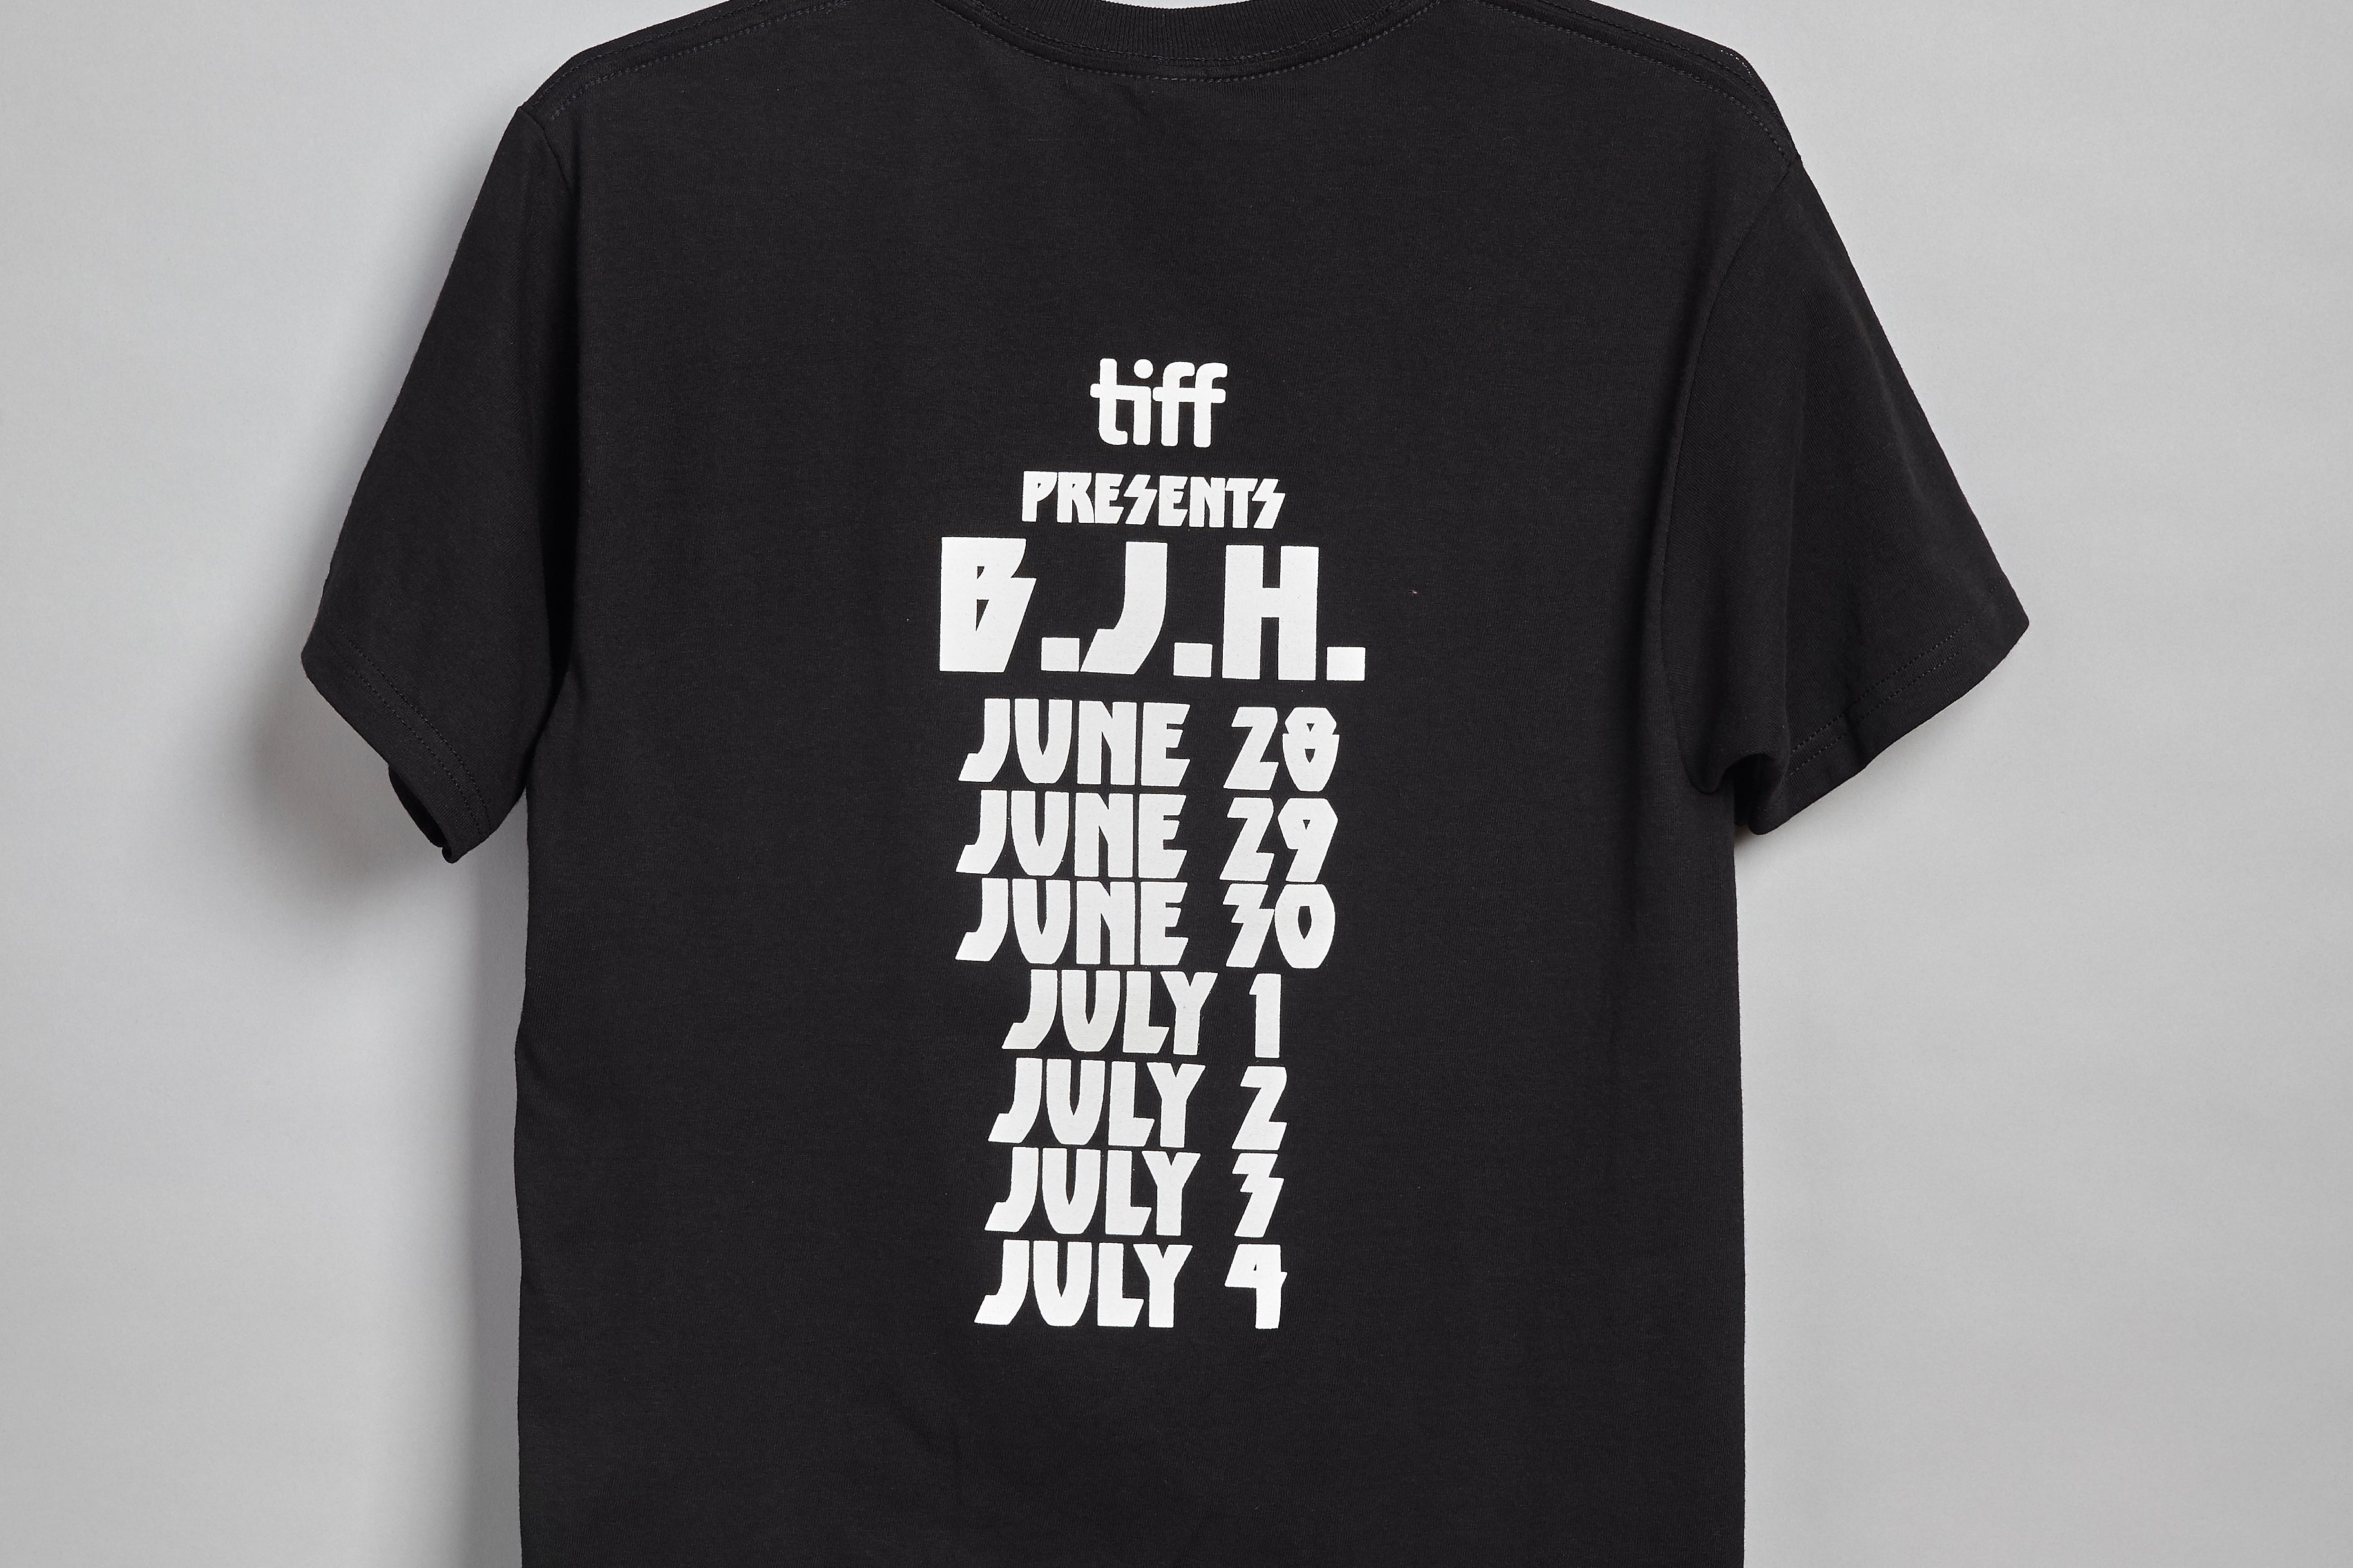 Black T-Shirt with a white "Heavy Metal" style type face on the back. Mimicking dates that are usually written on the back of a concert tour T-Shirt. It reads, "tiff presents B.J.H. June 20, June 29, June 30, July 1, July 2, July 4"